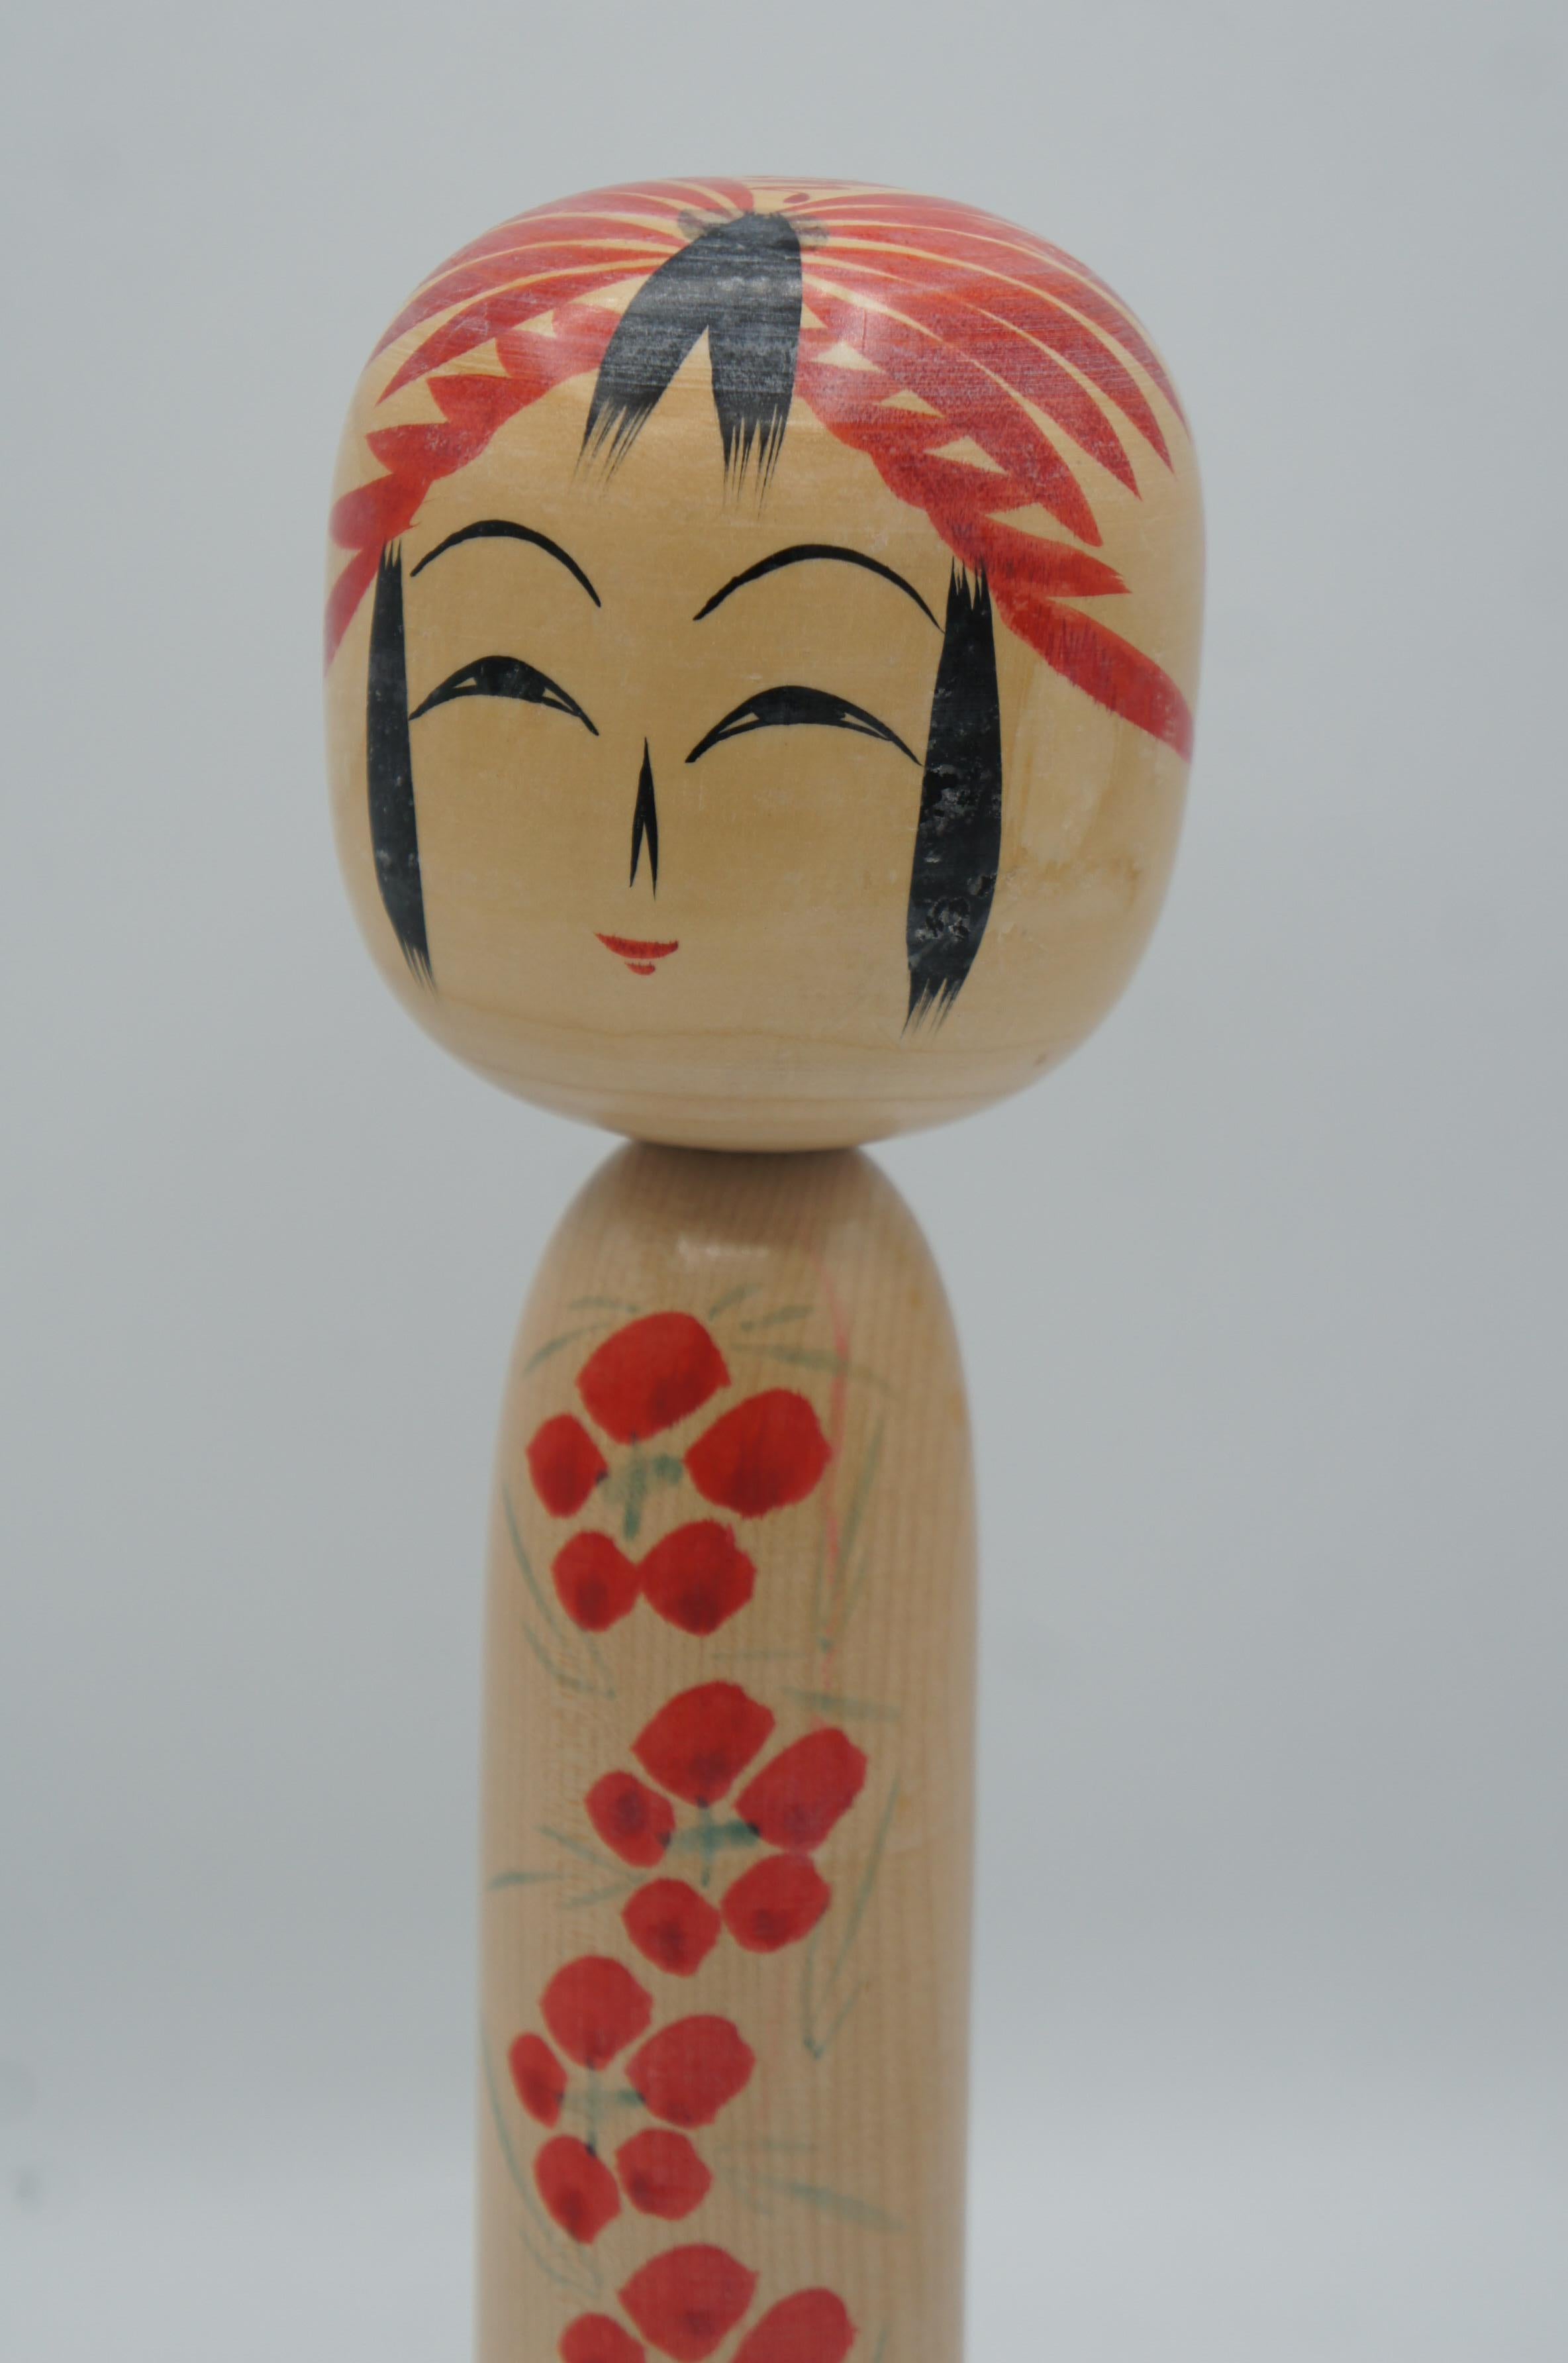 This is a wooden doll which is called Kokeshi in Japanese.
This kokeshi was made with Togatta style. And the kokeshi artist who made this is Kouichi SATO.
He was born in 1929, 22nd November. And this was made in 1978, 29th January. 
All these